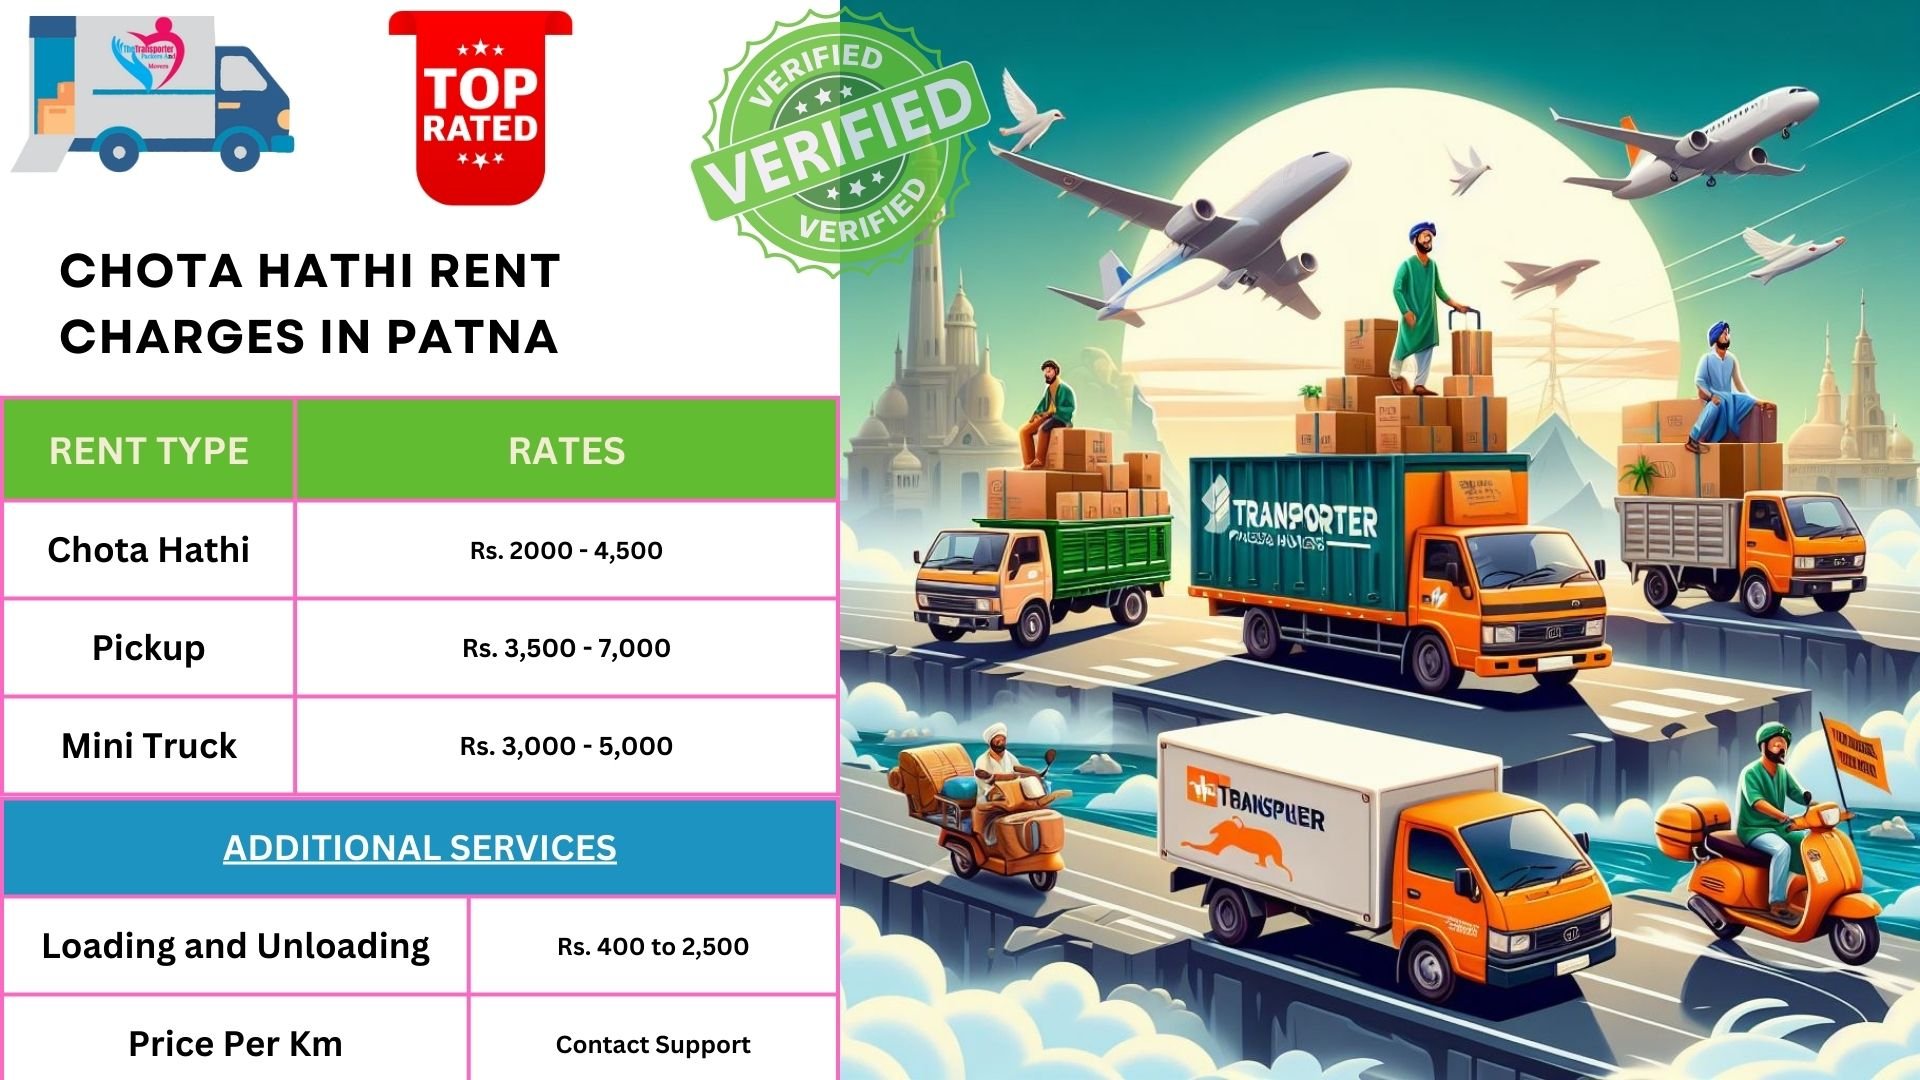 Getting the Best Chota Hathi on Rent in Patna